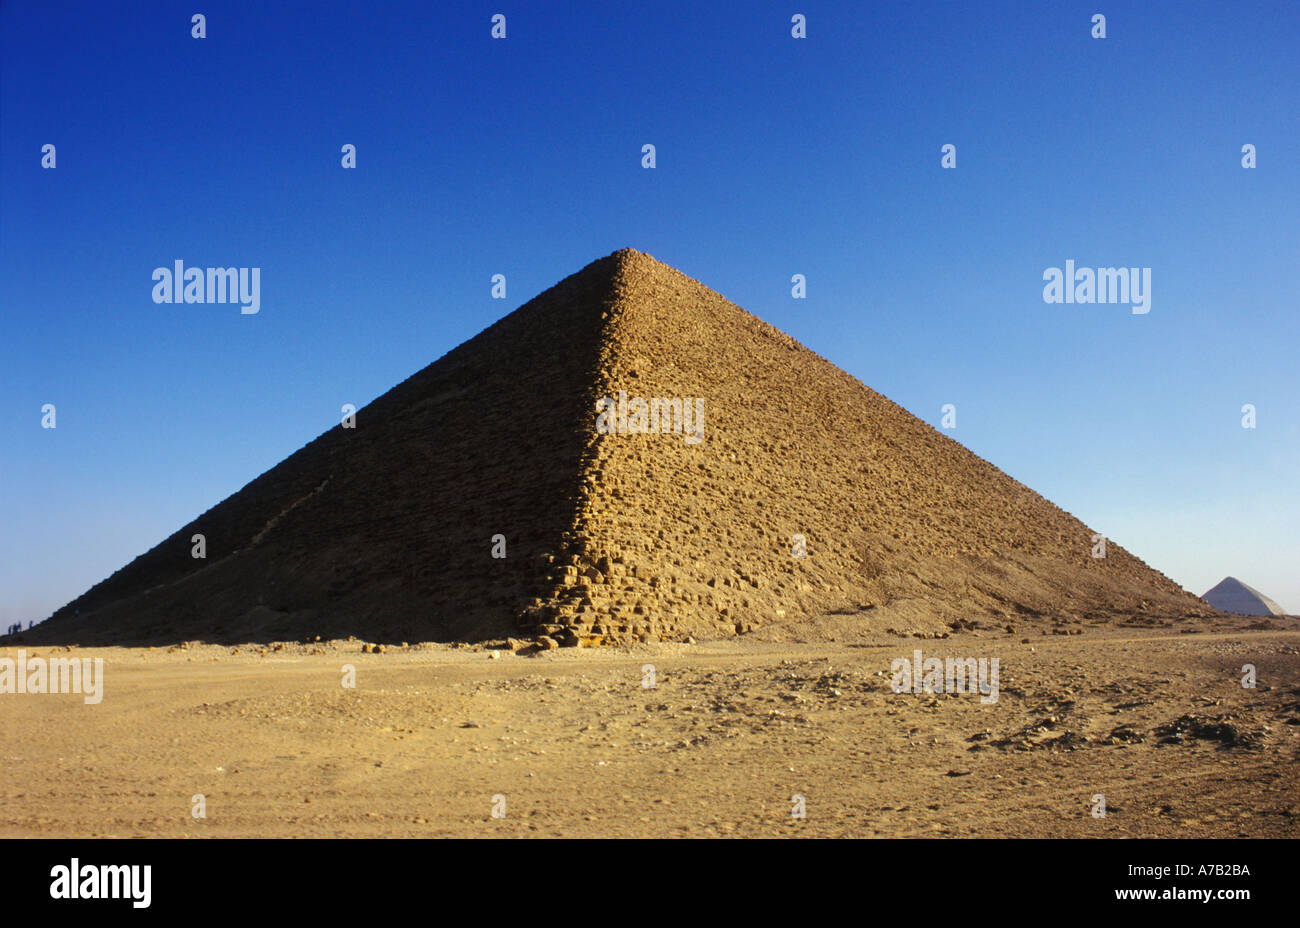 Red Pyramid of Sneferu at Dahshur, Egypt. Ancient archaeology. Stock Photo